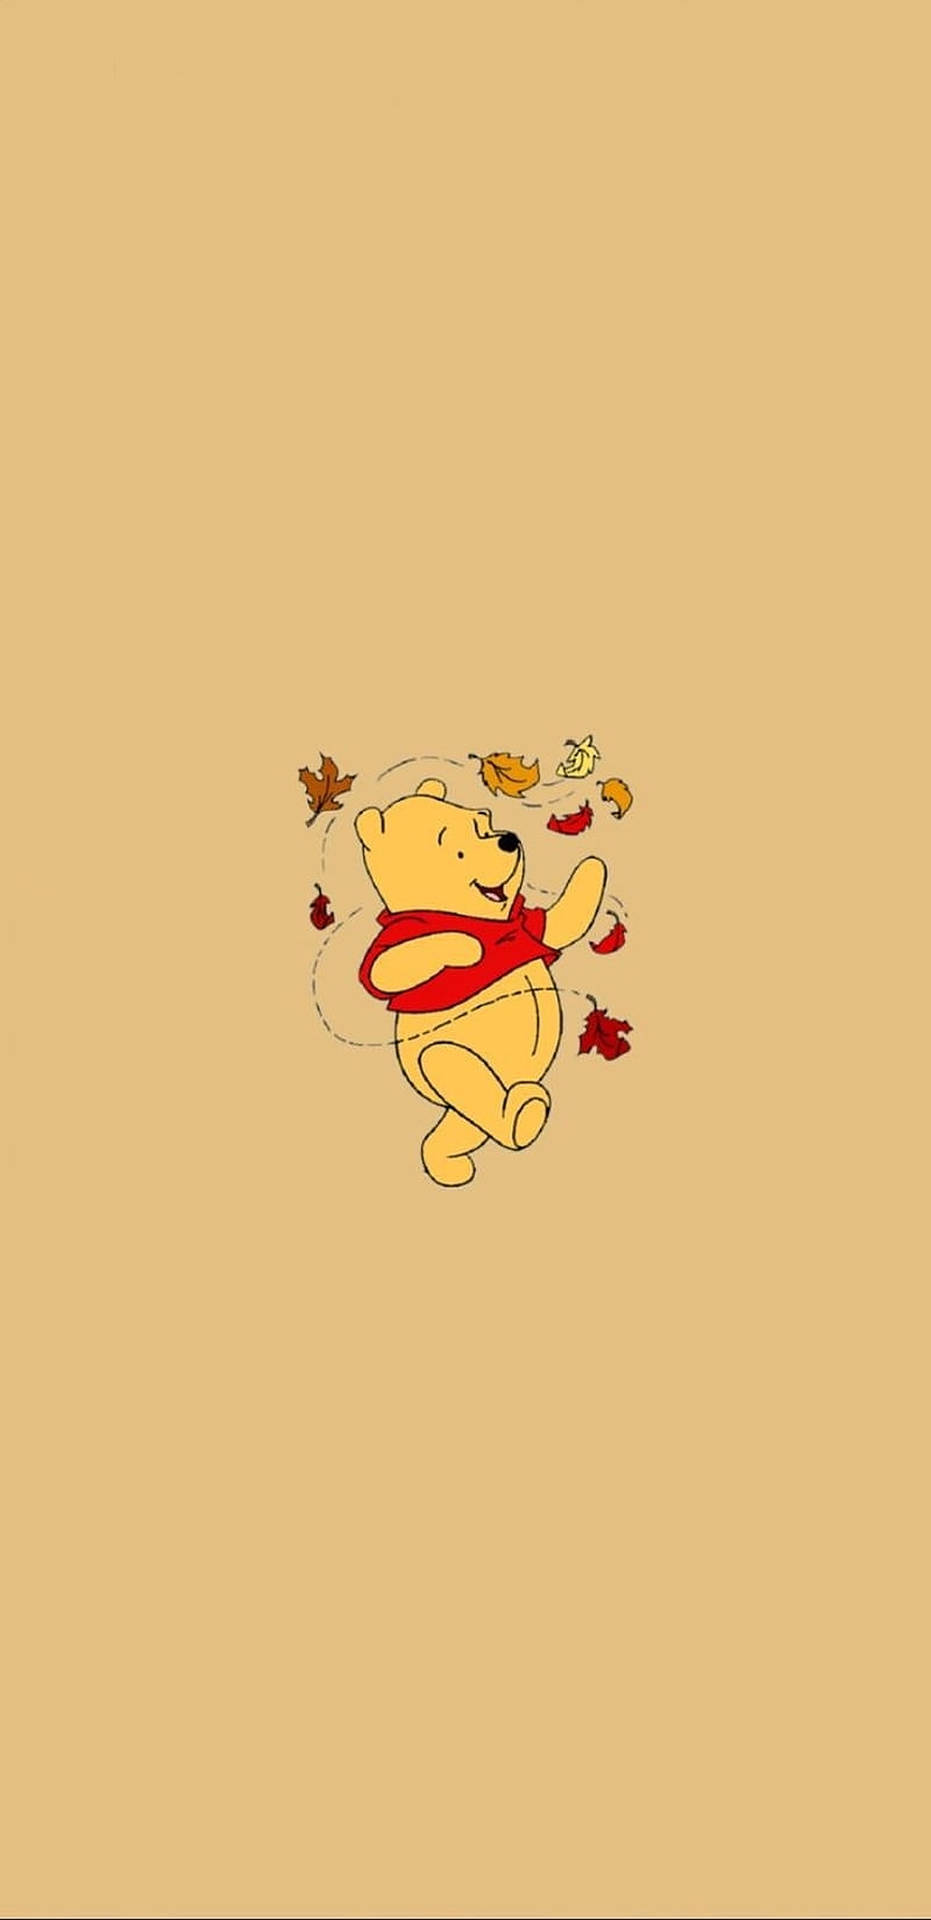 Download Winnie The Pooh With Leaves Wallpaper